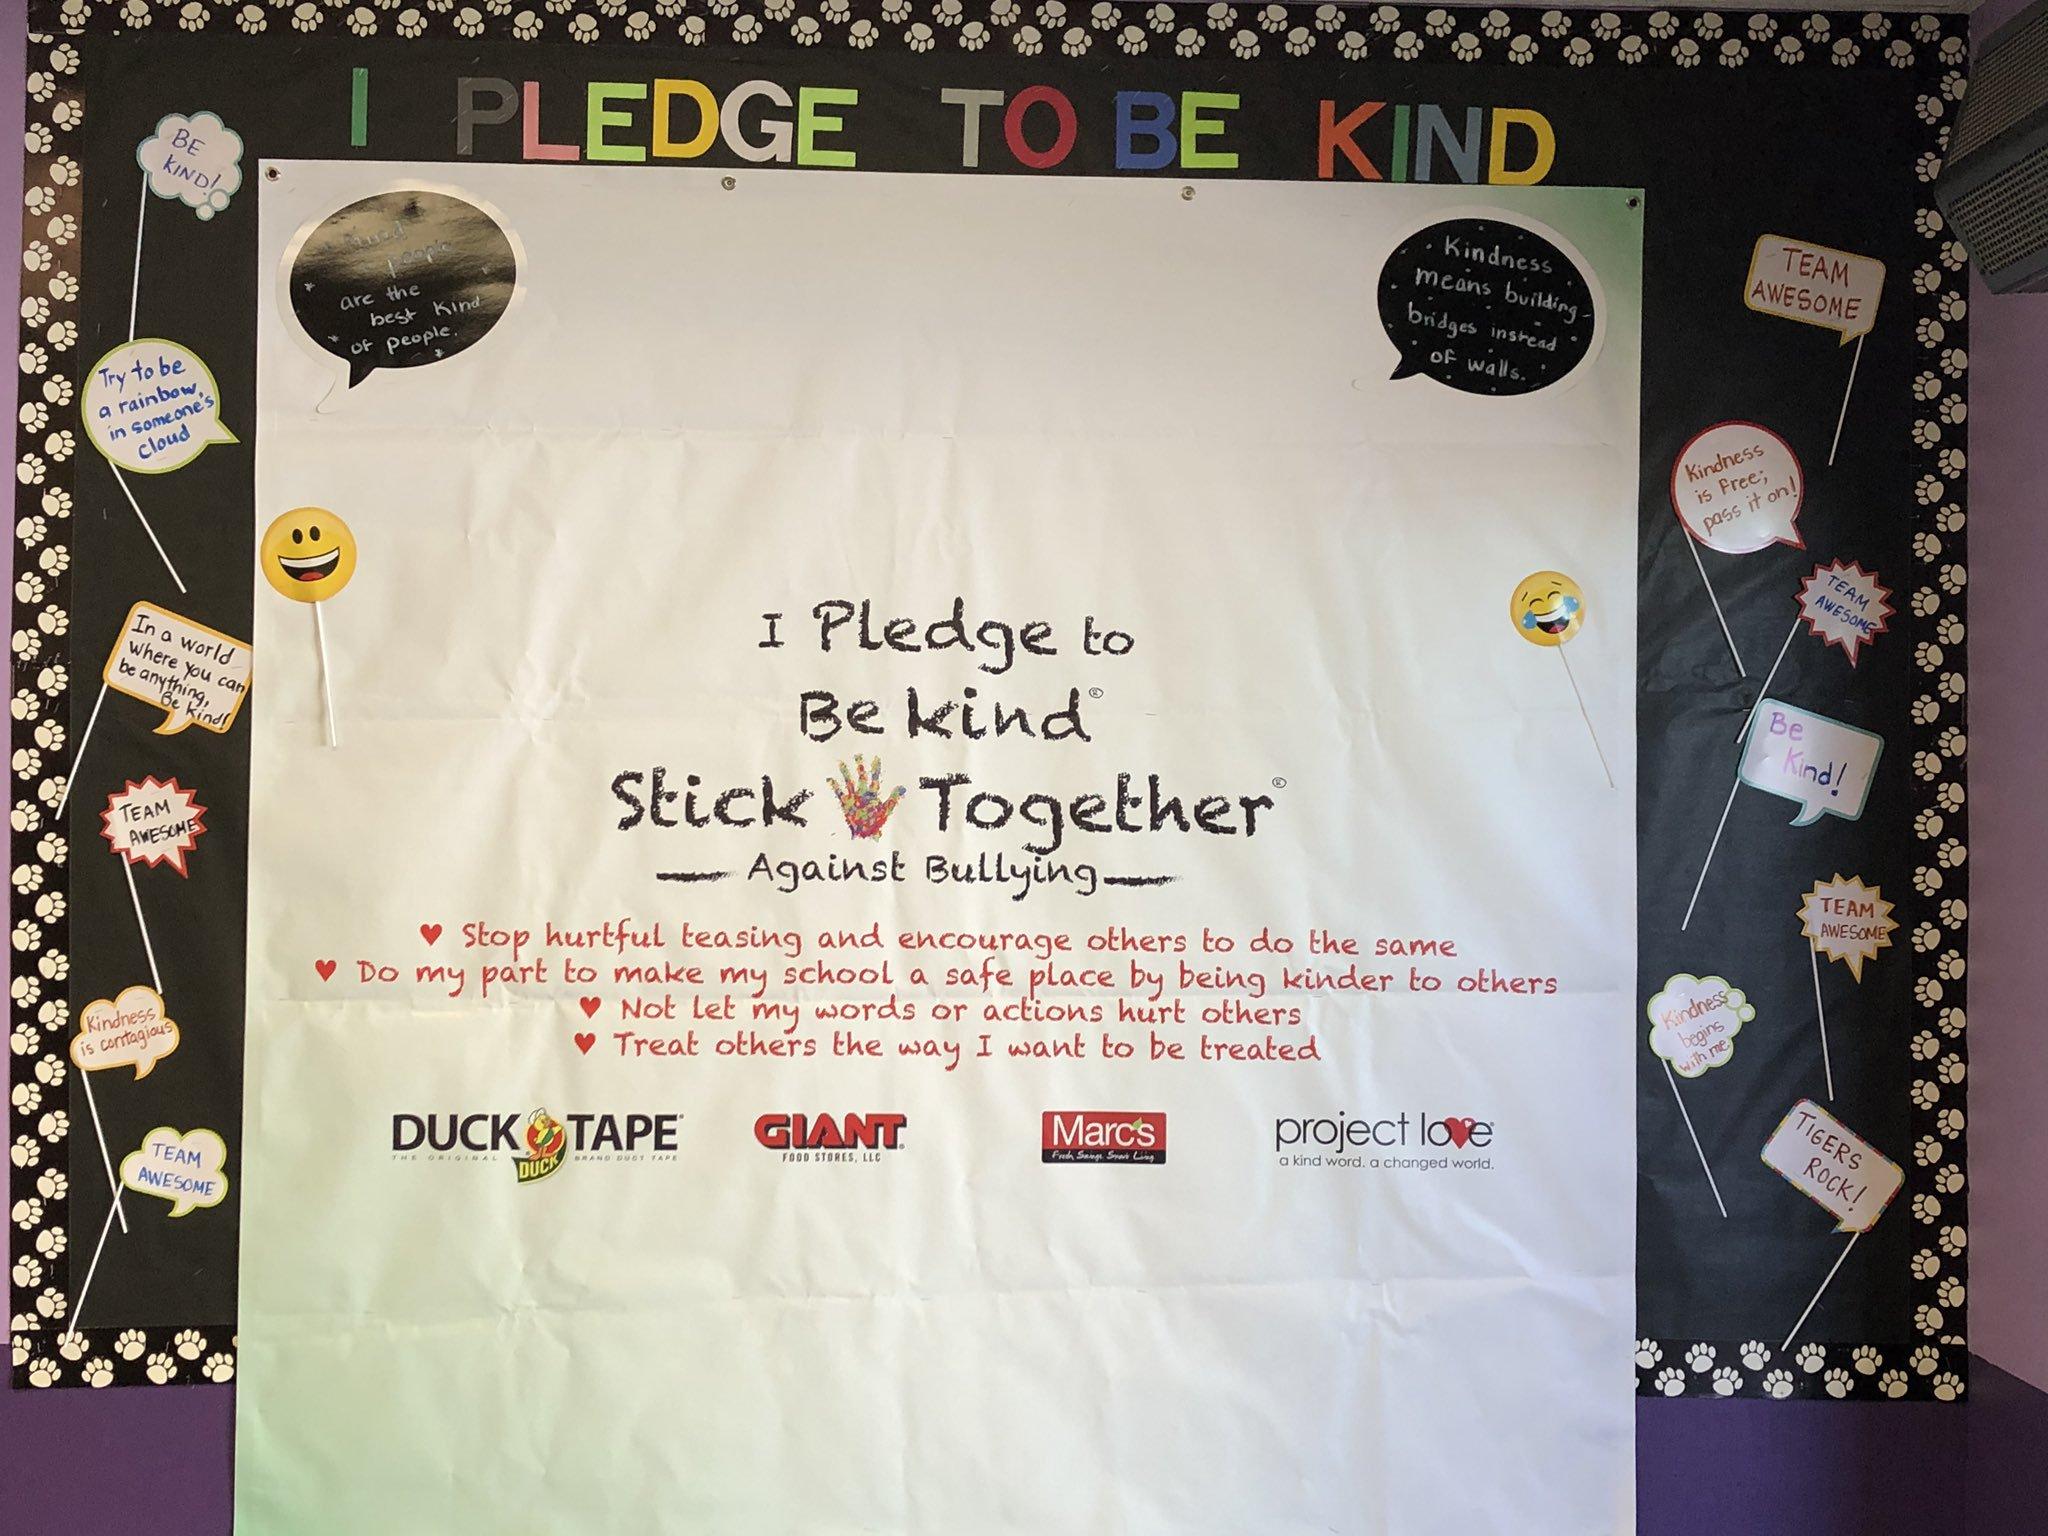 Picture of student pledge it states- I pledge to be kind, stick together against bulling. Stop hurtful teasing and encourage others to do the same